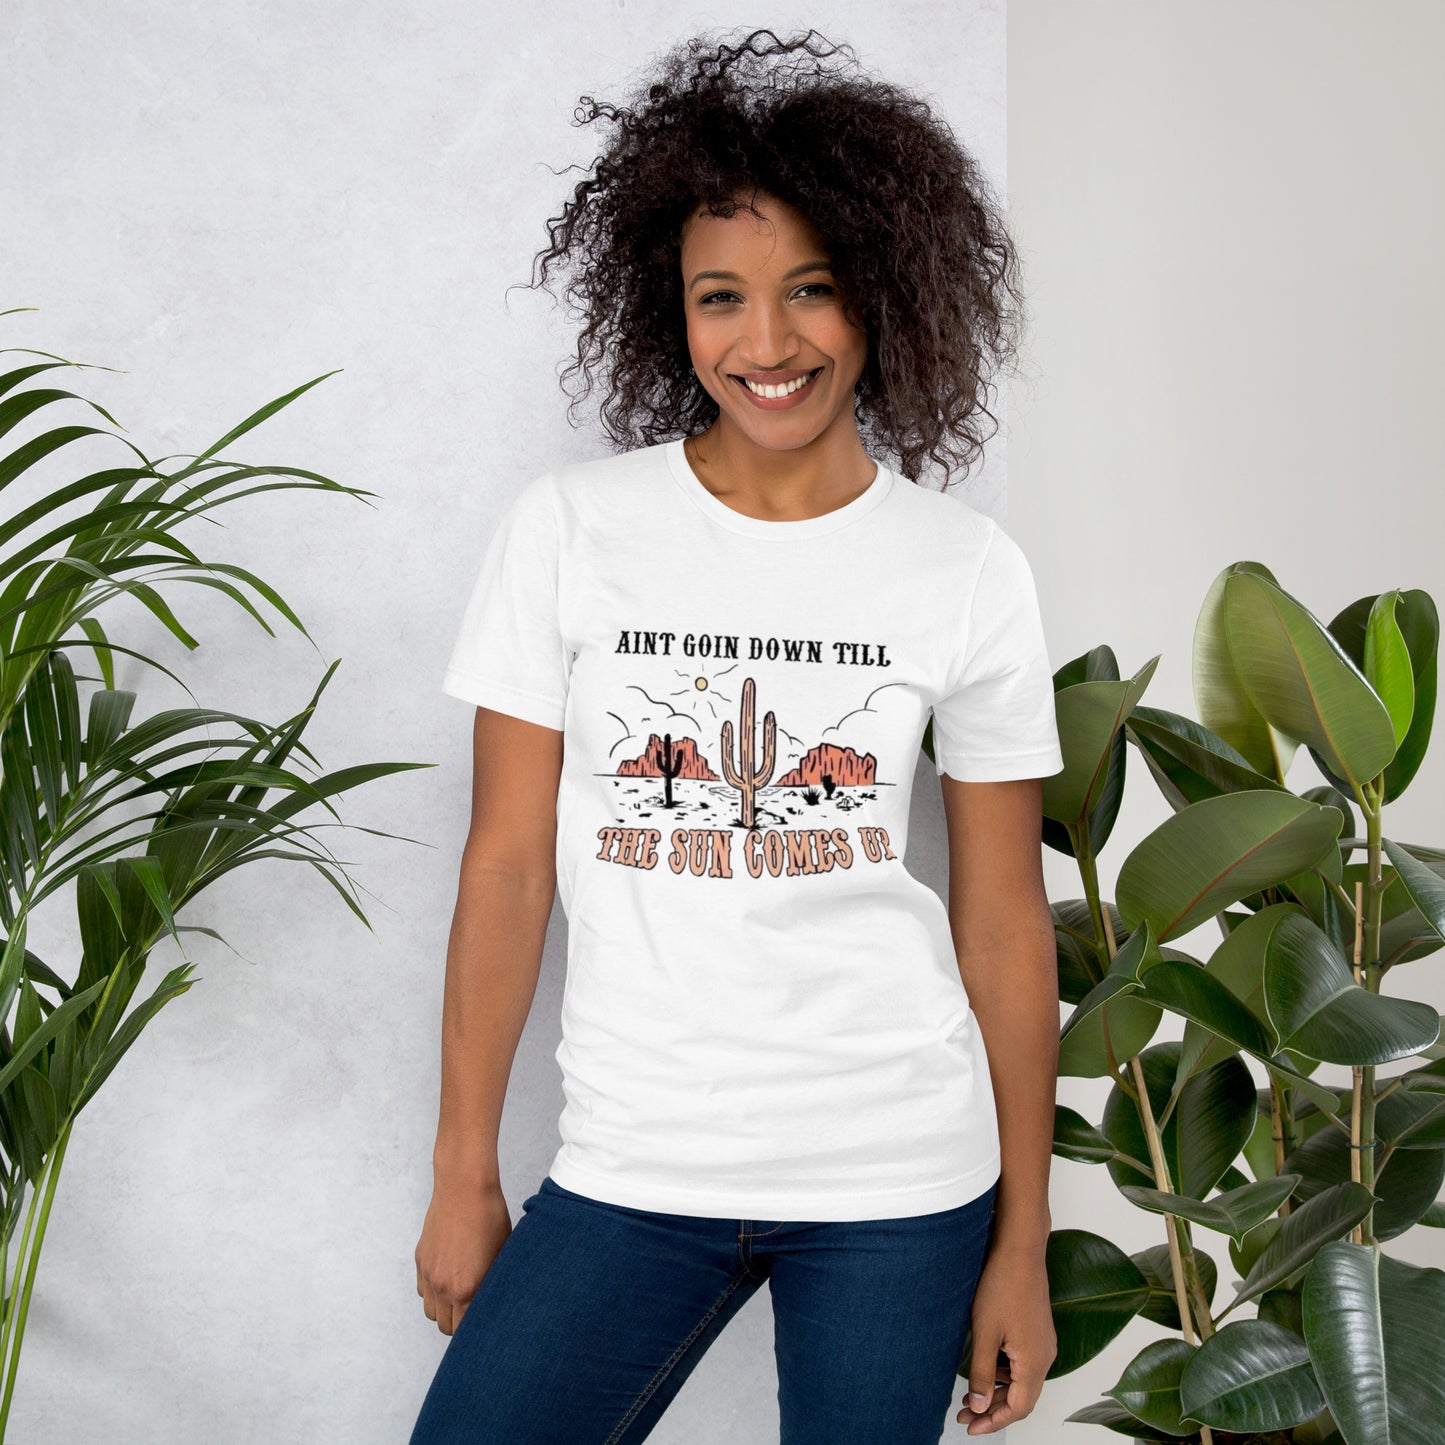 Aint Going Down Til The Sun Comes Up - Classic Country Tees